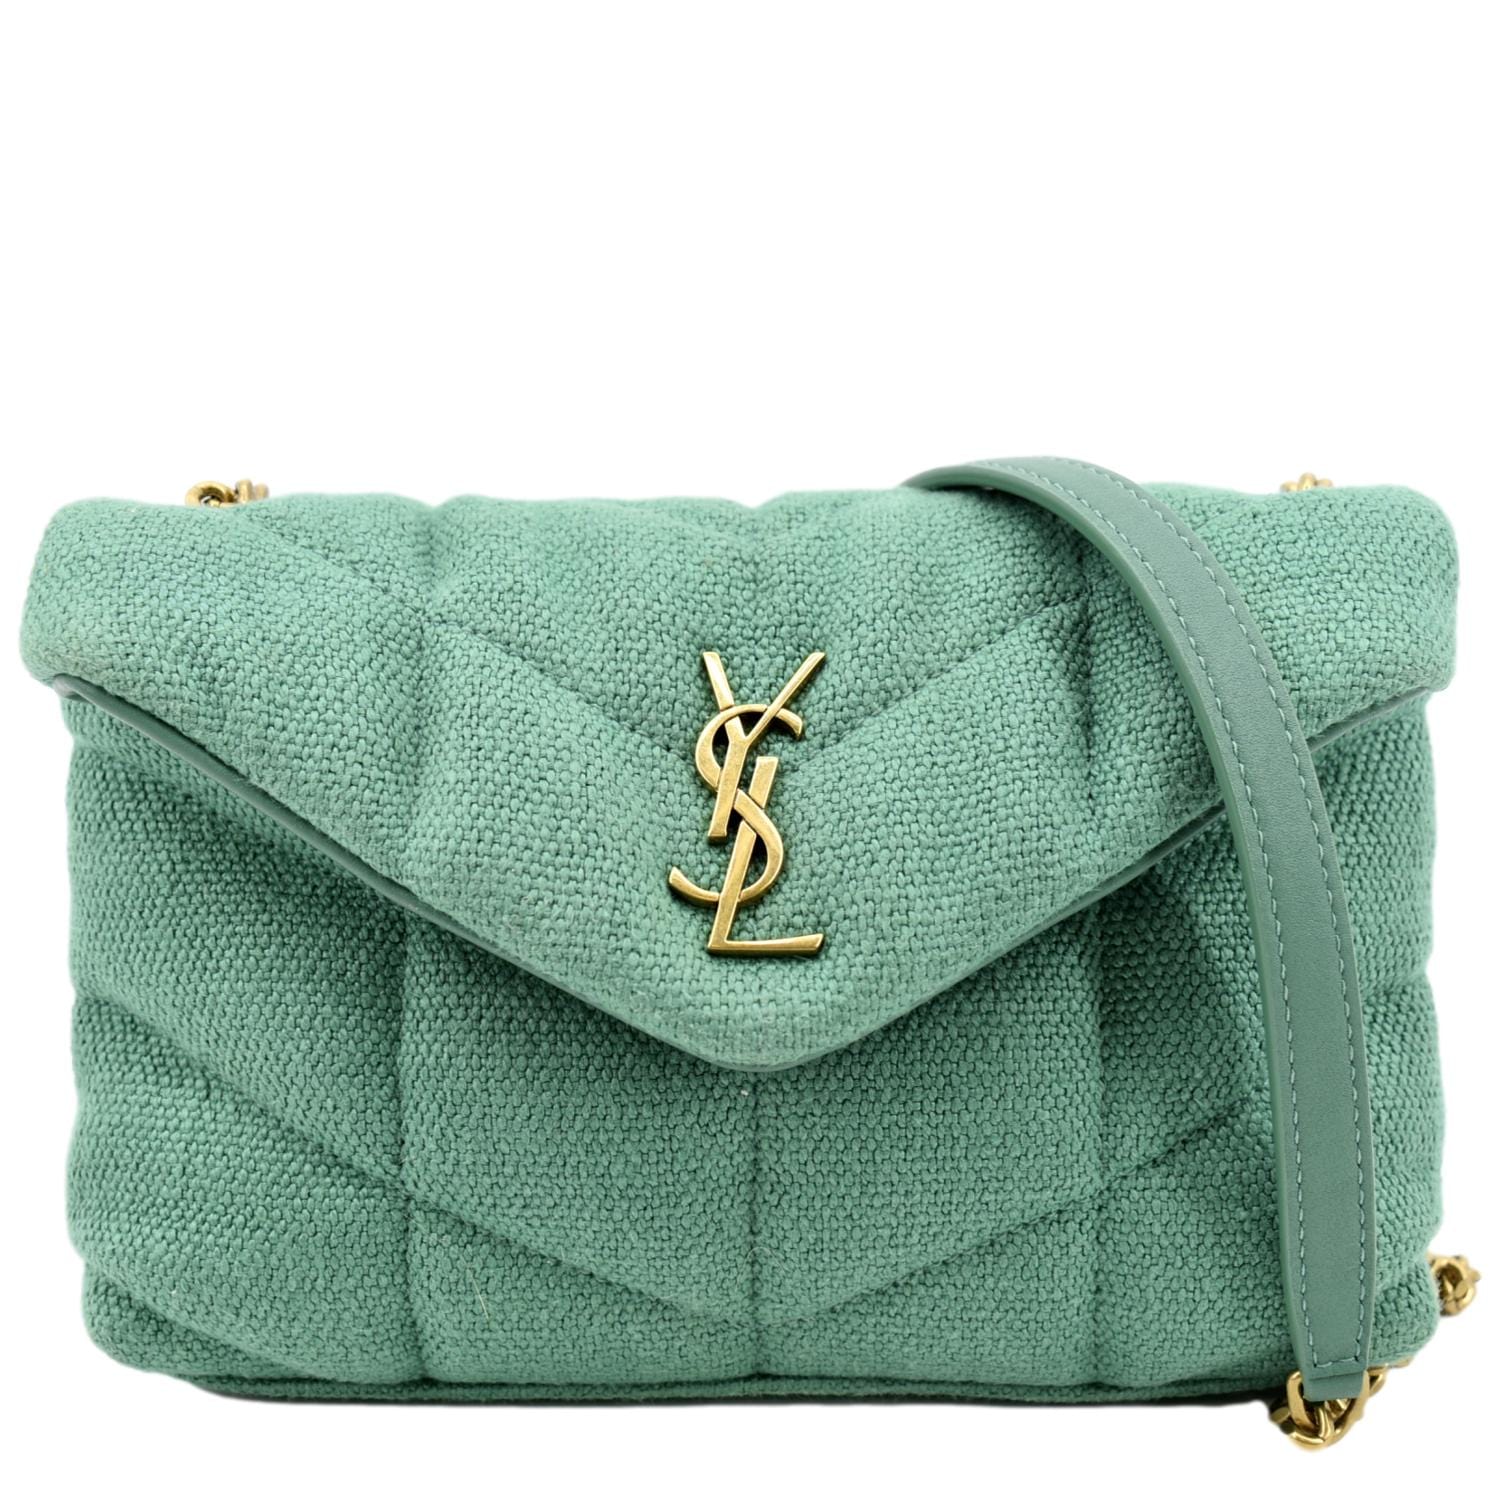 YSL Yves Saint Laurent Monogram Pebbled Card Case - SAGE GREEN - NEW WITH  TAGS